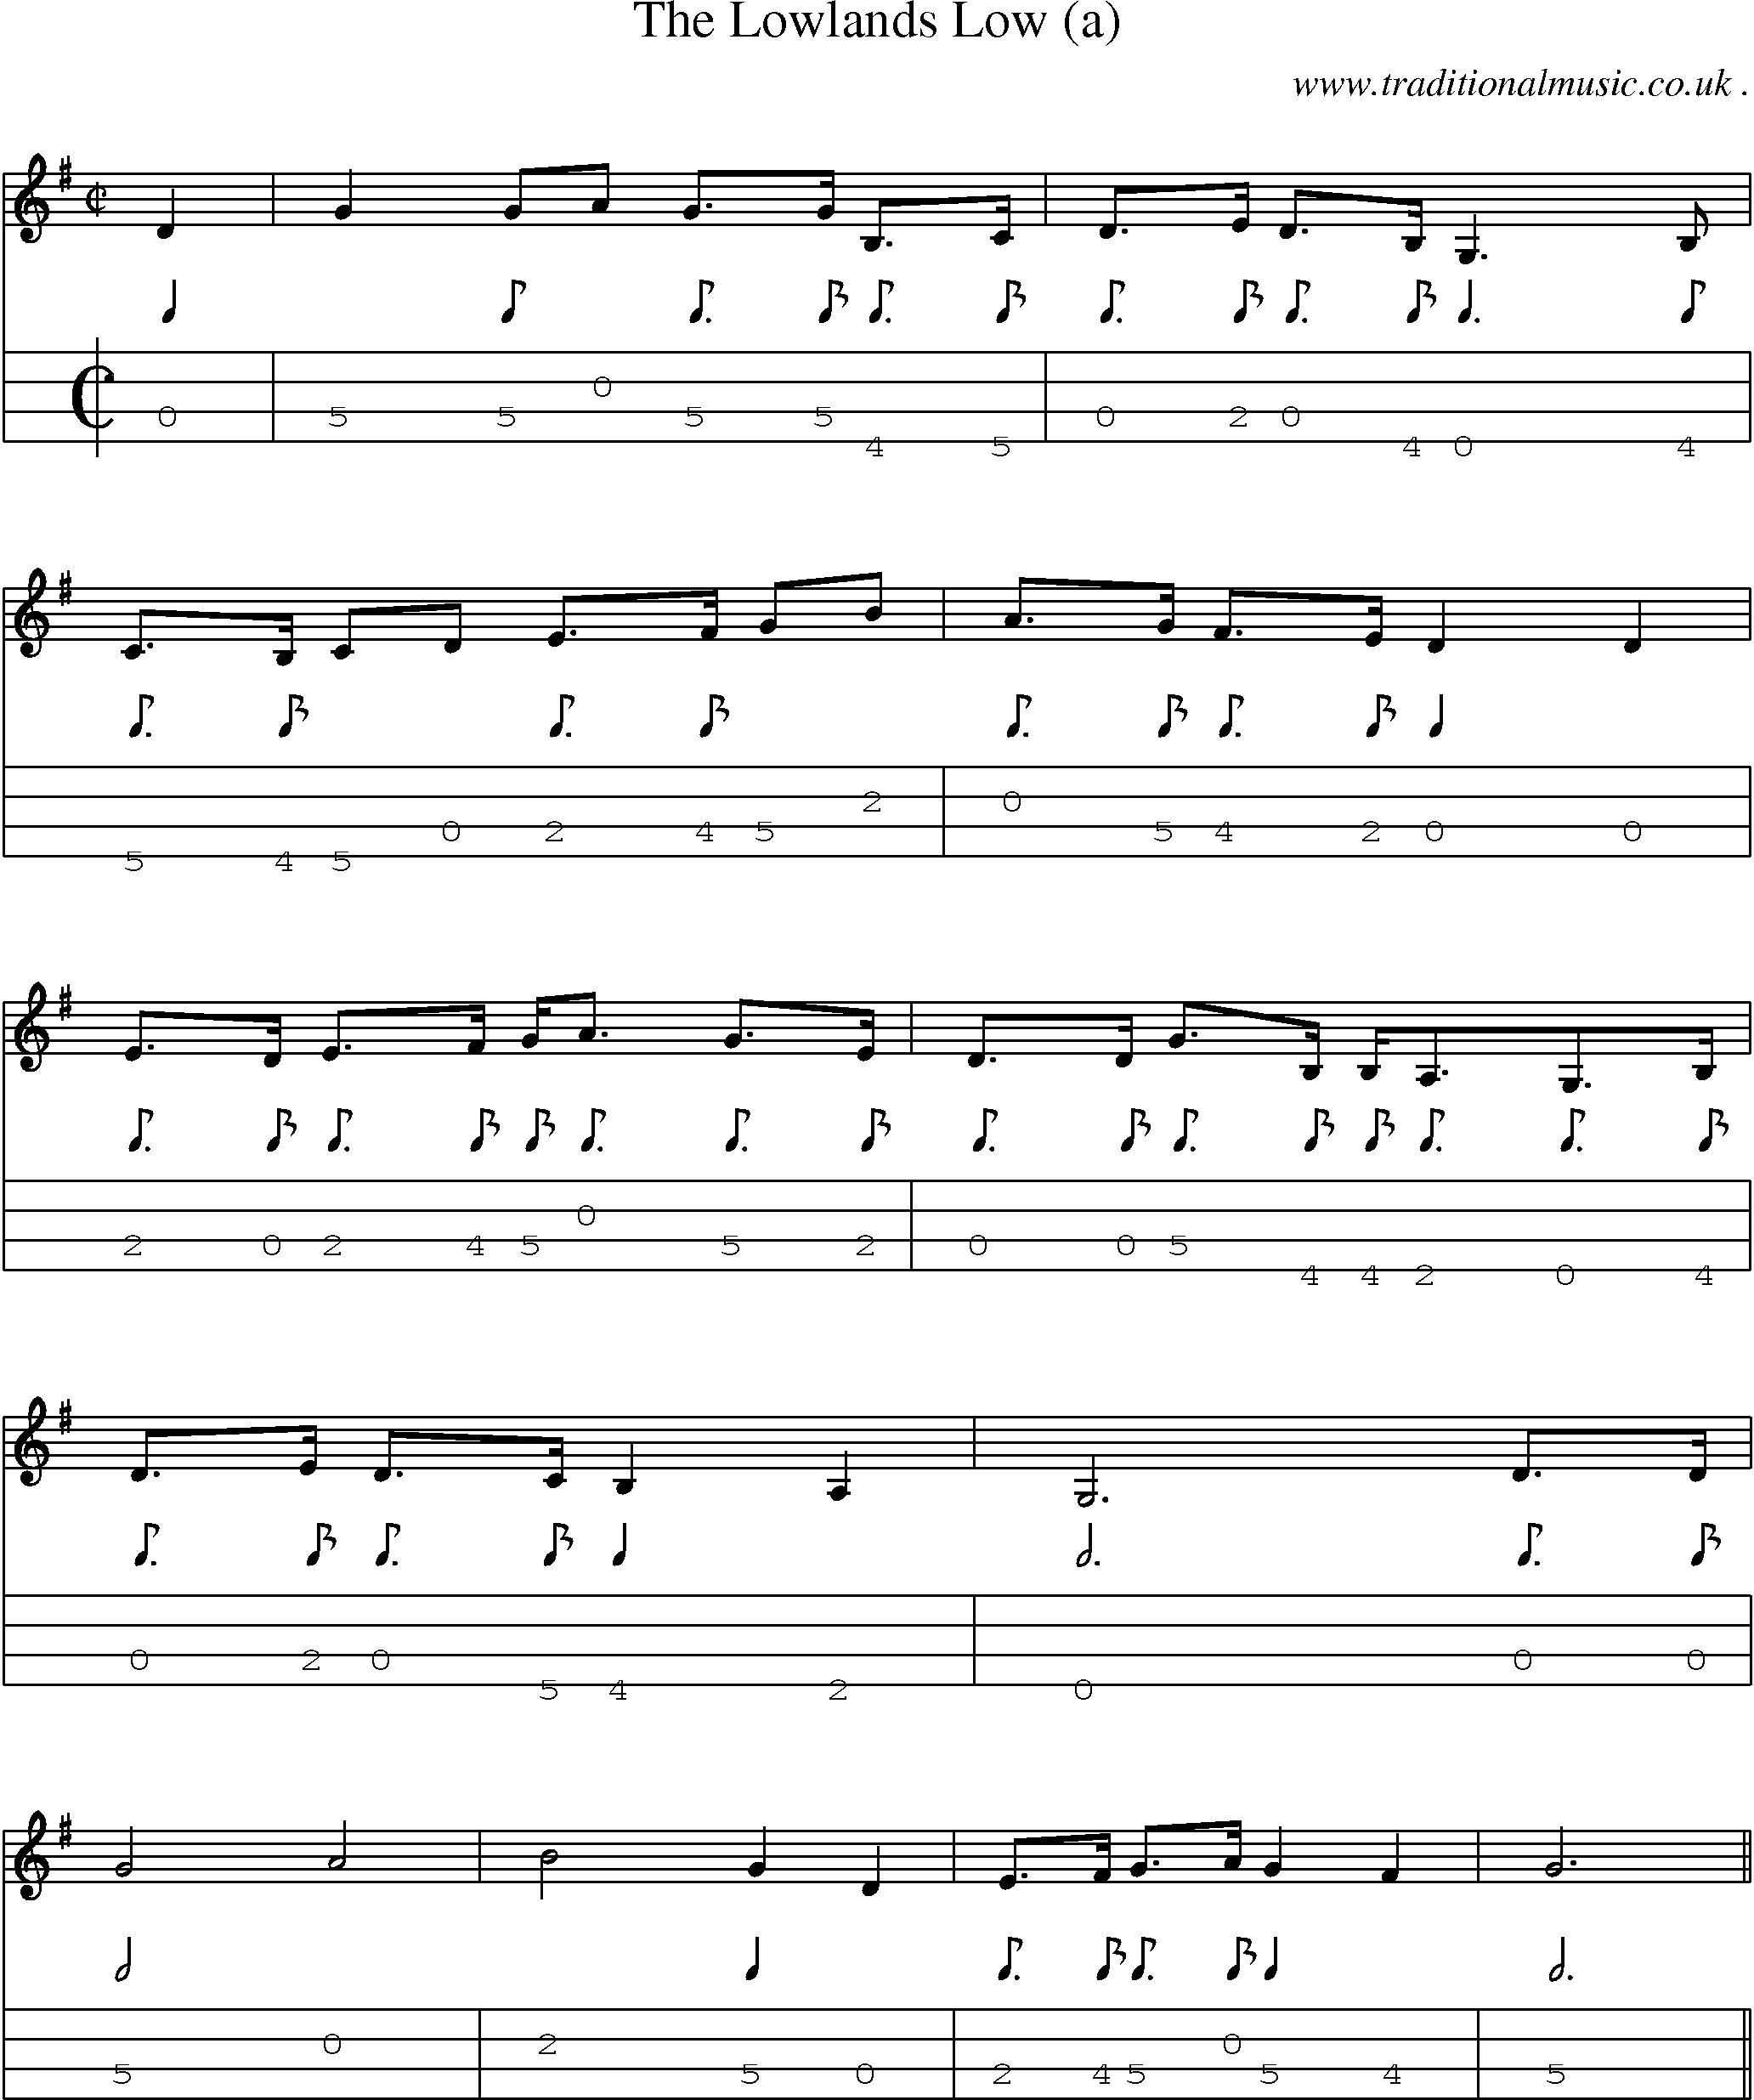 Sheet-Music and Mandolin Tabs for The Lowlands Low (a)